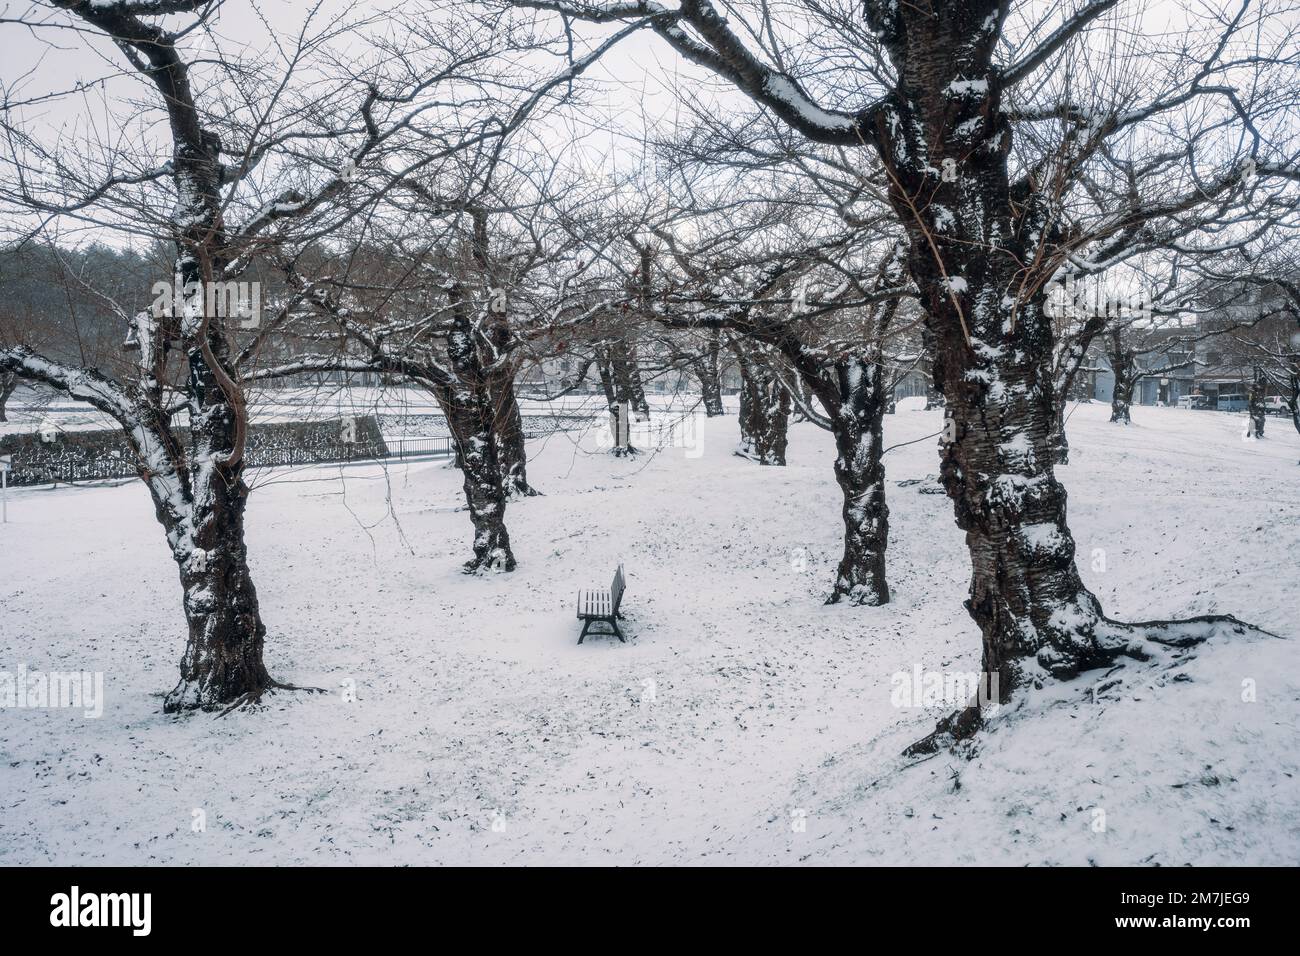 A lonely bench in a snow-covered park with leafless trees Stock Photo